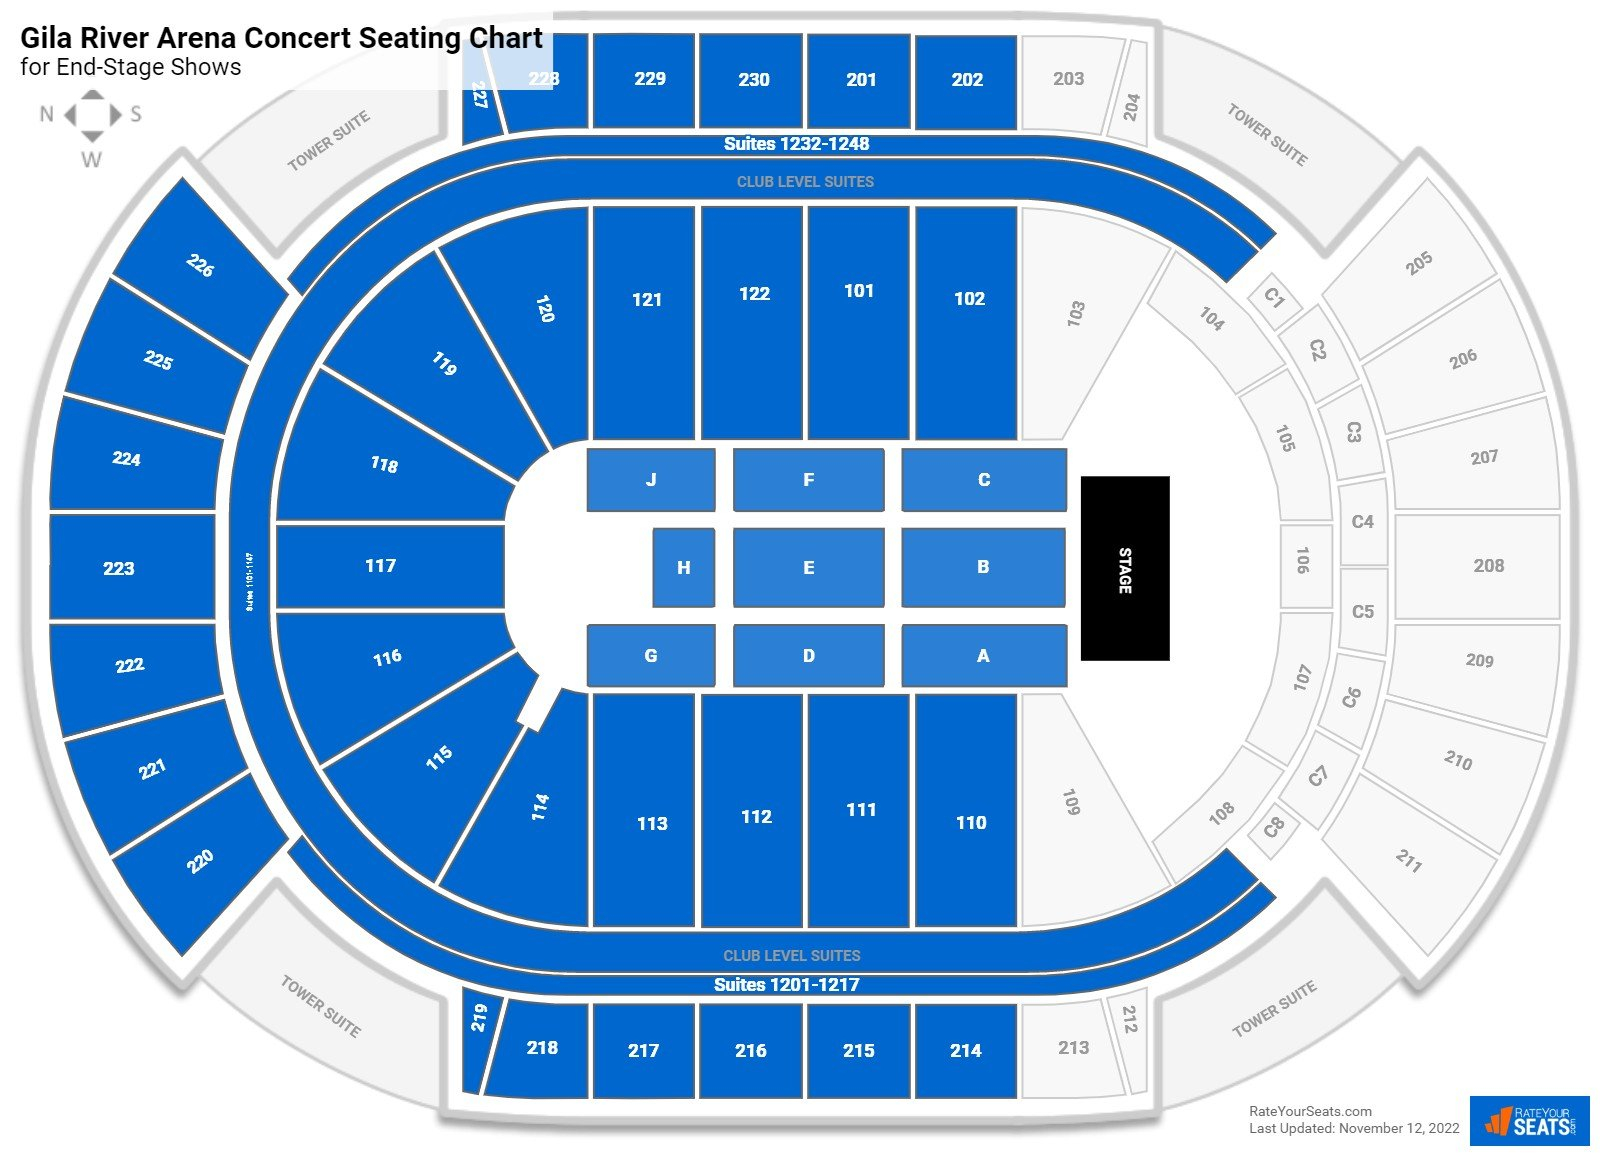 Gila River Arena Seating Charts For Concerts RateYourSeats